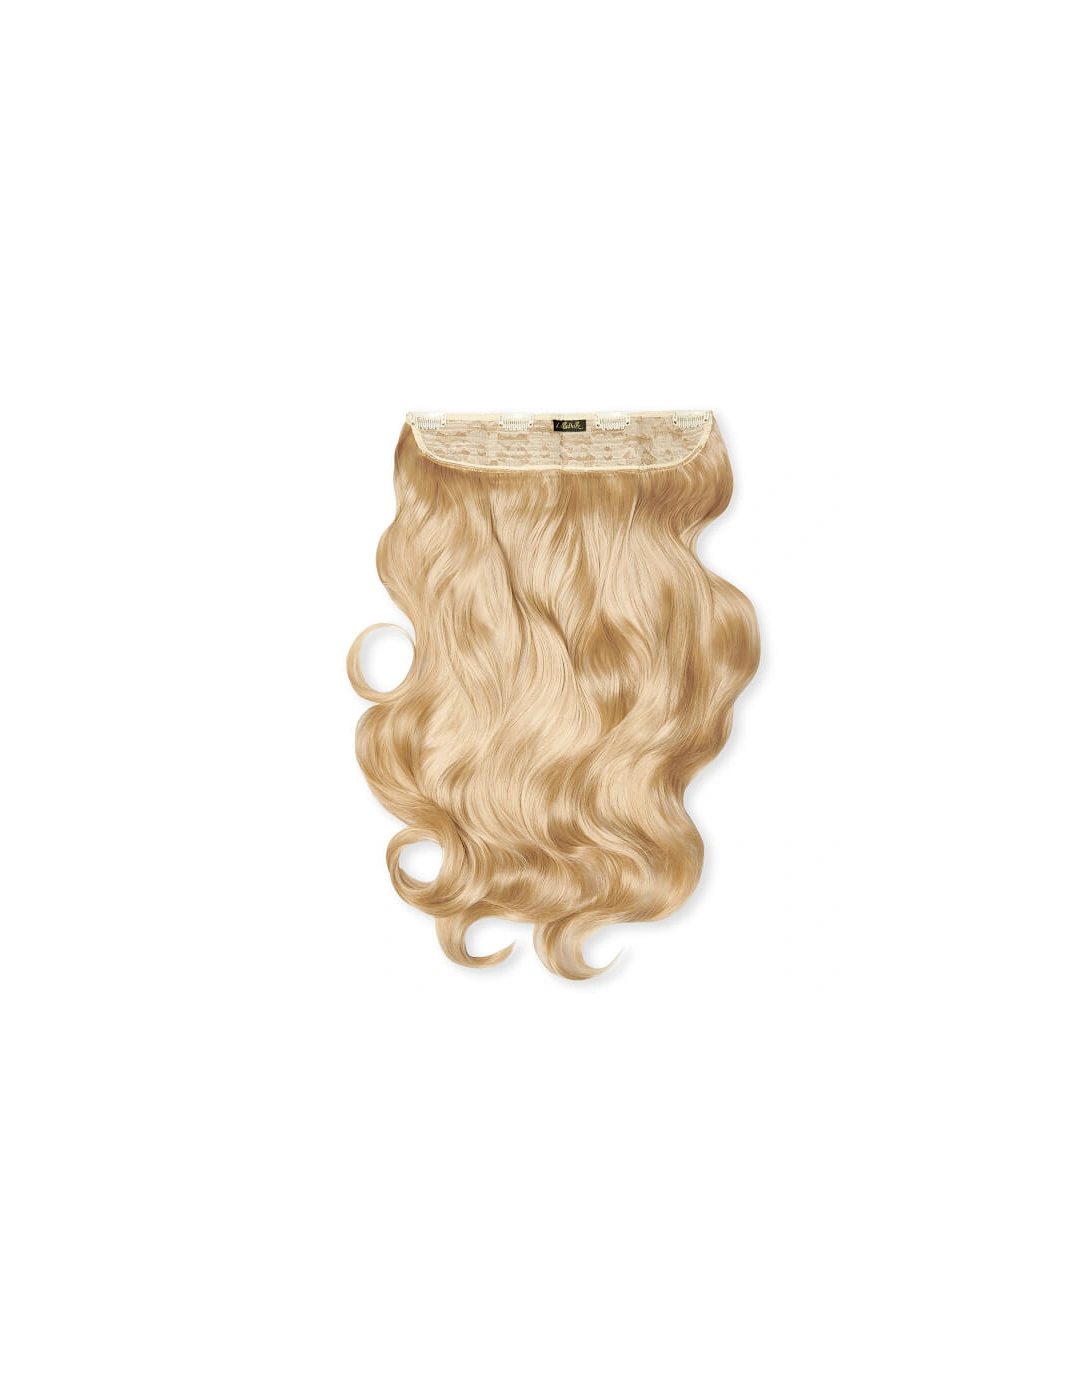 Thick 20 1-Piece Curly Clip in Hair Extensions - Golden Blonde, 2 of 1